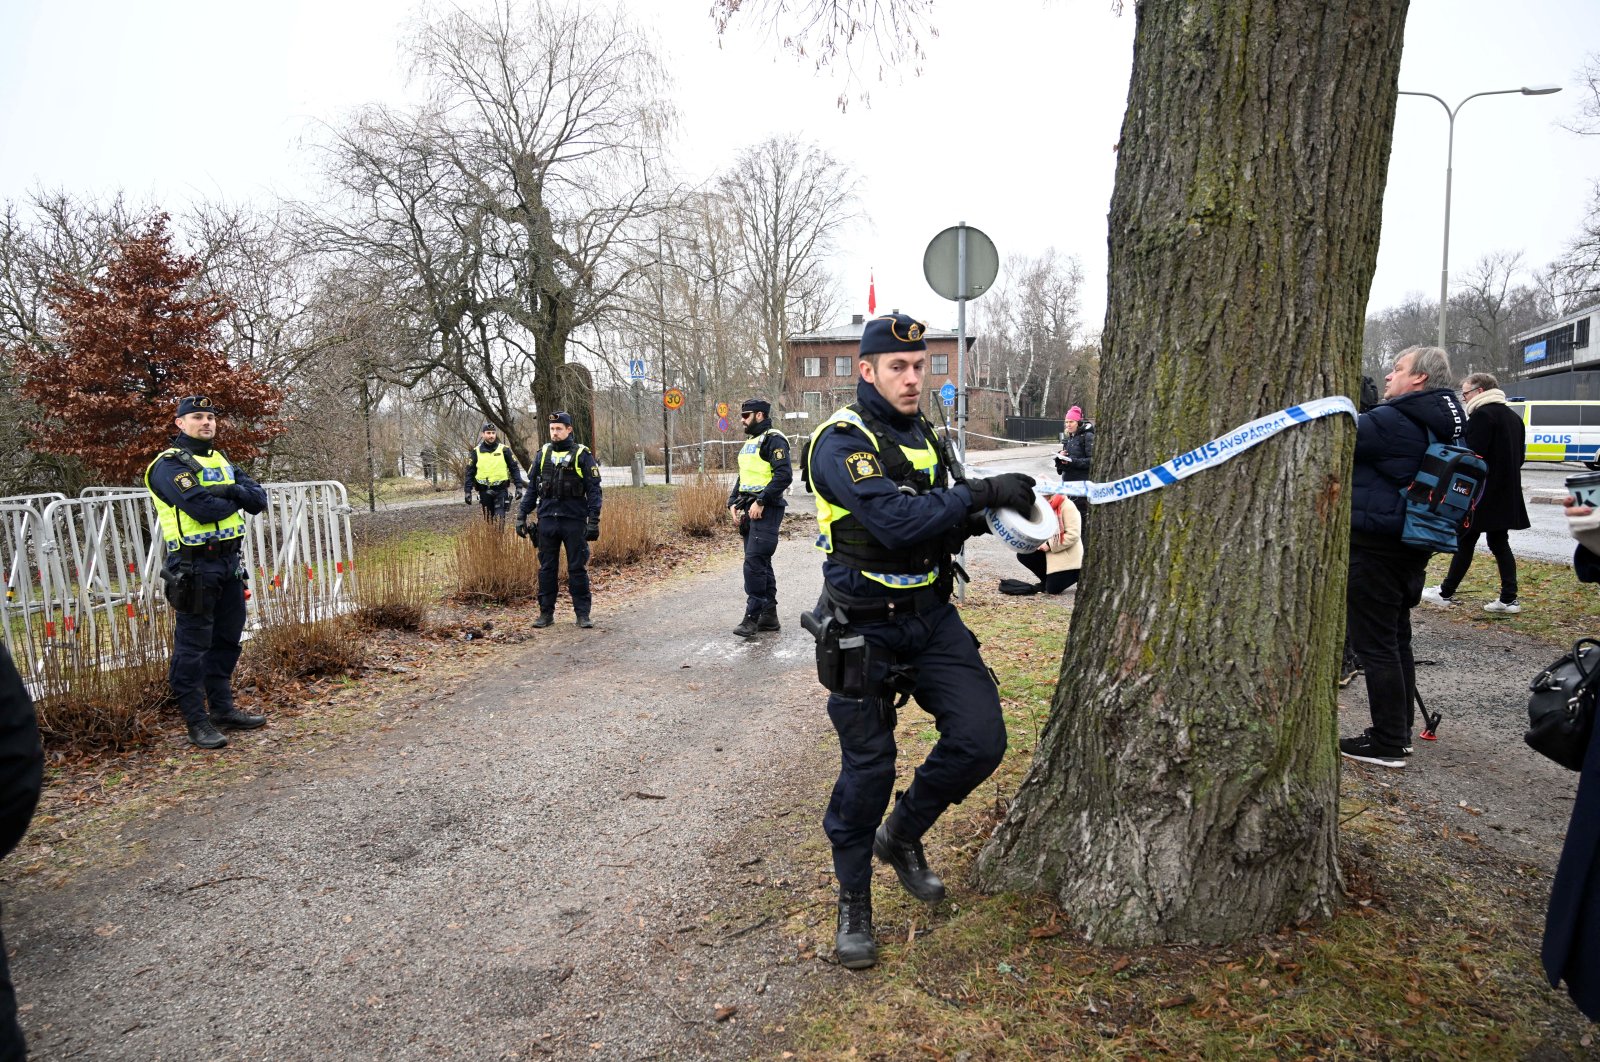 Police cordon off the area where leader of the far-right Danish political party Stram Kurs Rasmus Paludan has planned to burn the Quran outside the Turkish Embassy in Stockholm, Sweden, Jan. 21, 2023. (Reuters Photo)